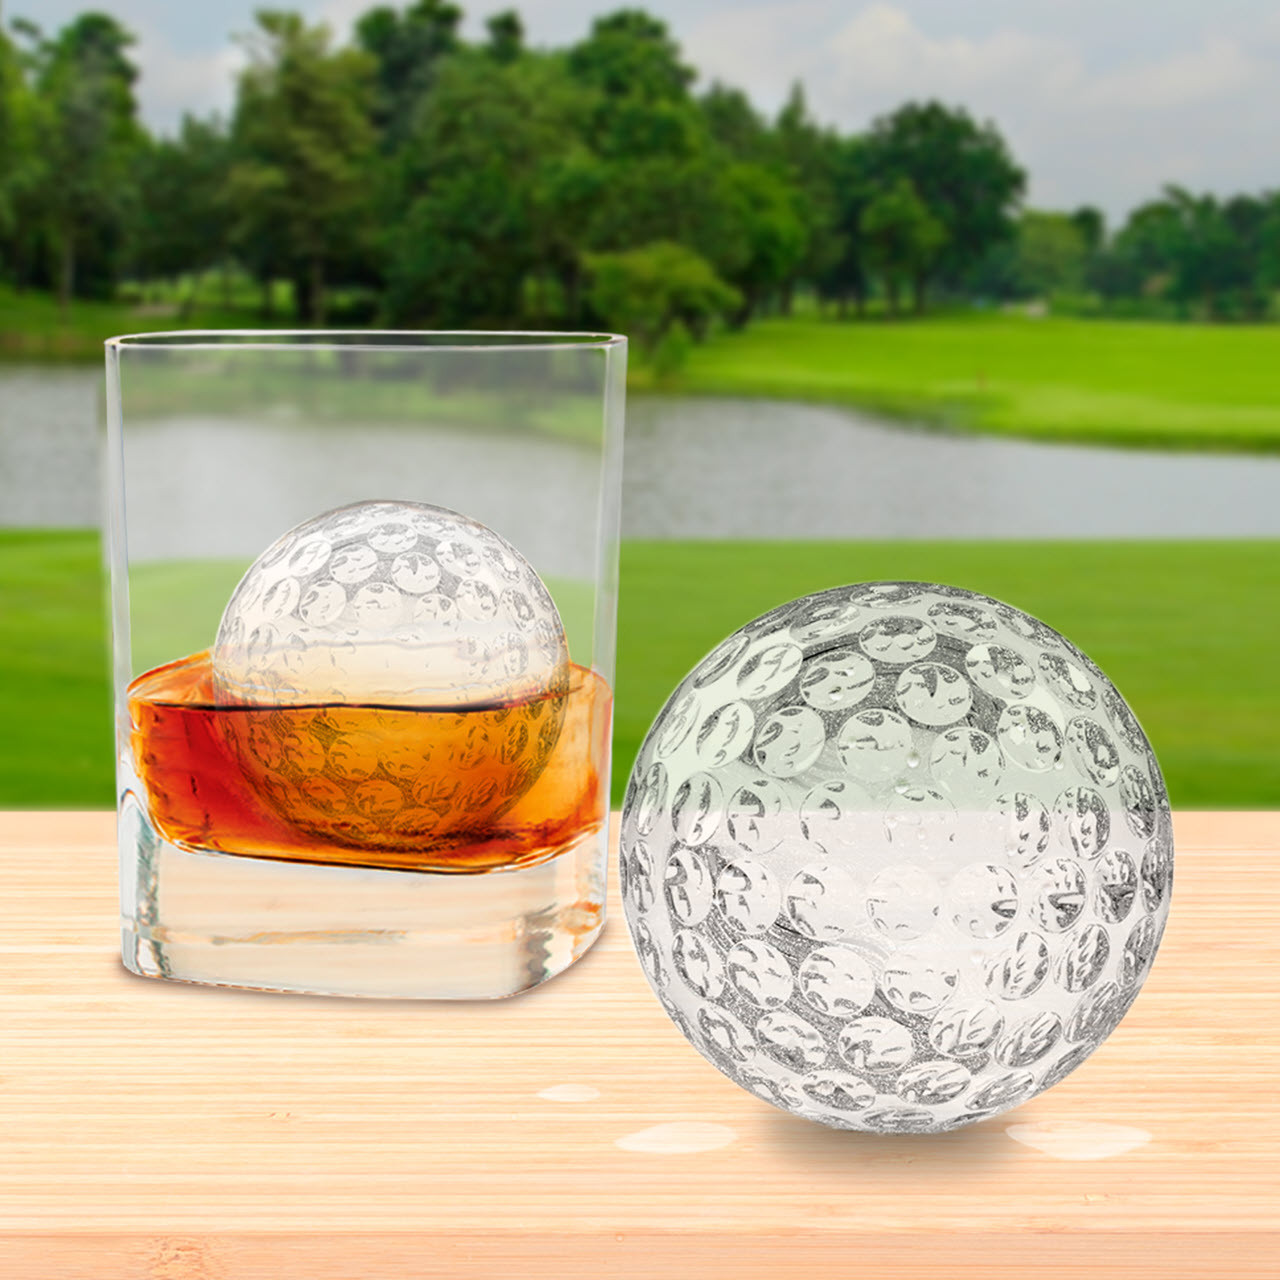 https://cdn11.bigcommerce.com/s-21kj3ntgv1/images/stencil/1280x1280/products/541/2189/Tovolo-Golf-Ball-Ice-Molds-Set-of-3-Lifestyle__26127.1642278704.jpg?c=2